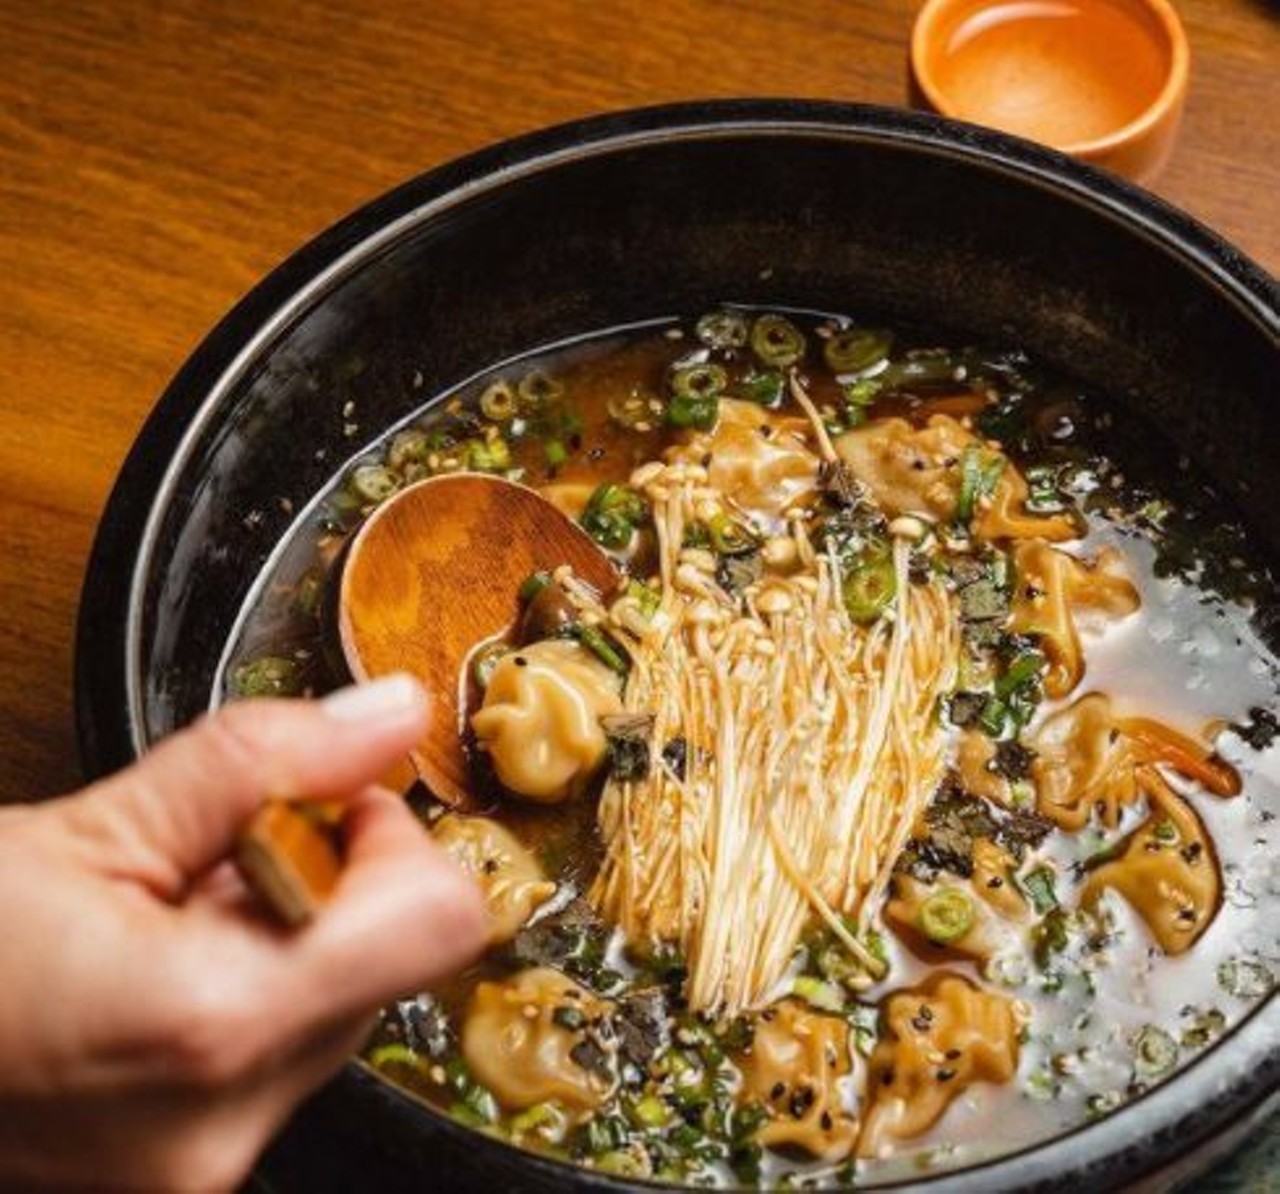 Buya Ramen  
911 Central Ave, St. Petersburg |  (727) 202-7010
This ramen and whiskey hotspot featured on Season 27 of Triple D. The fancy noodle shop is far from a dive, with high-end outposts in Miami and Berlin.
Photo via Buya/Instagram